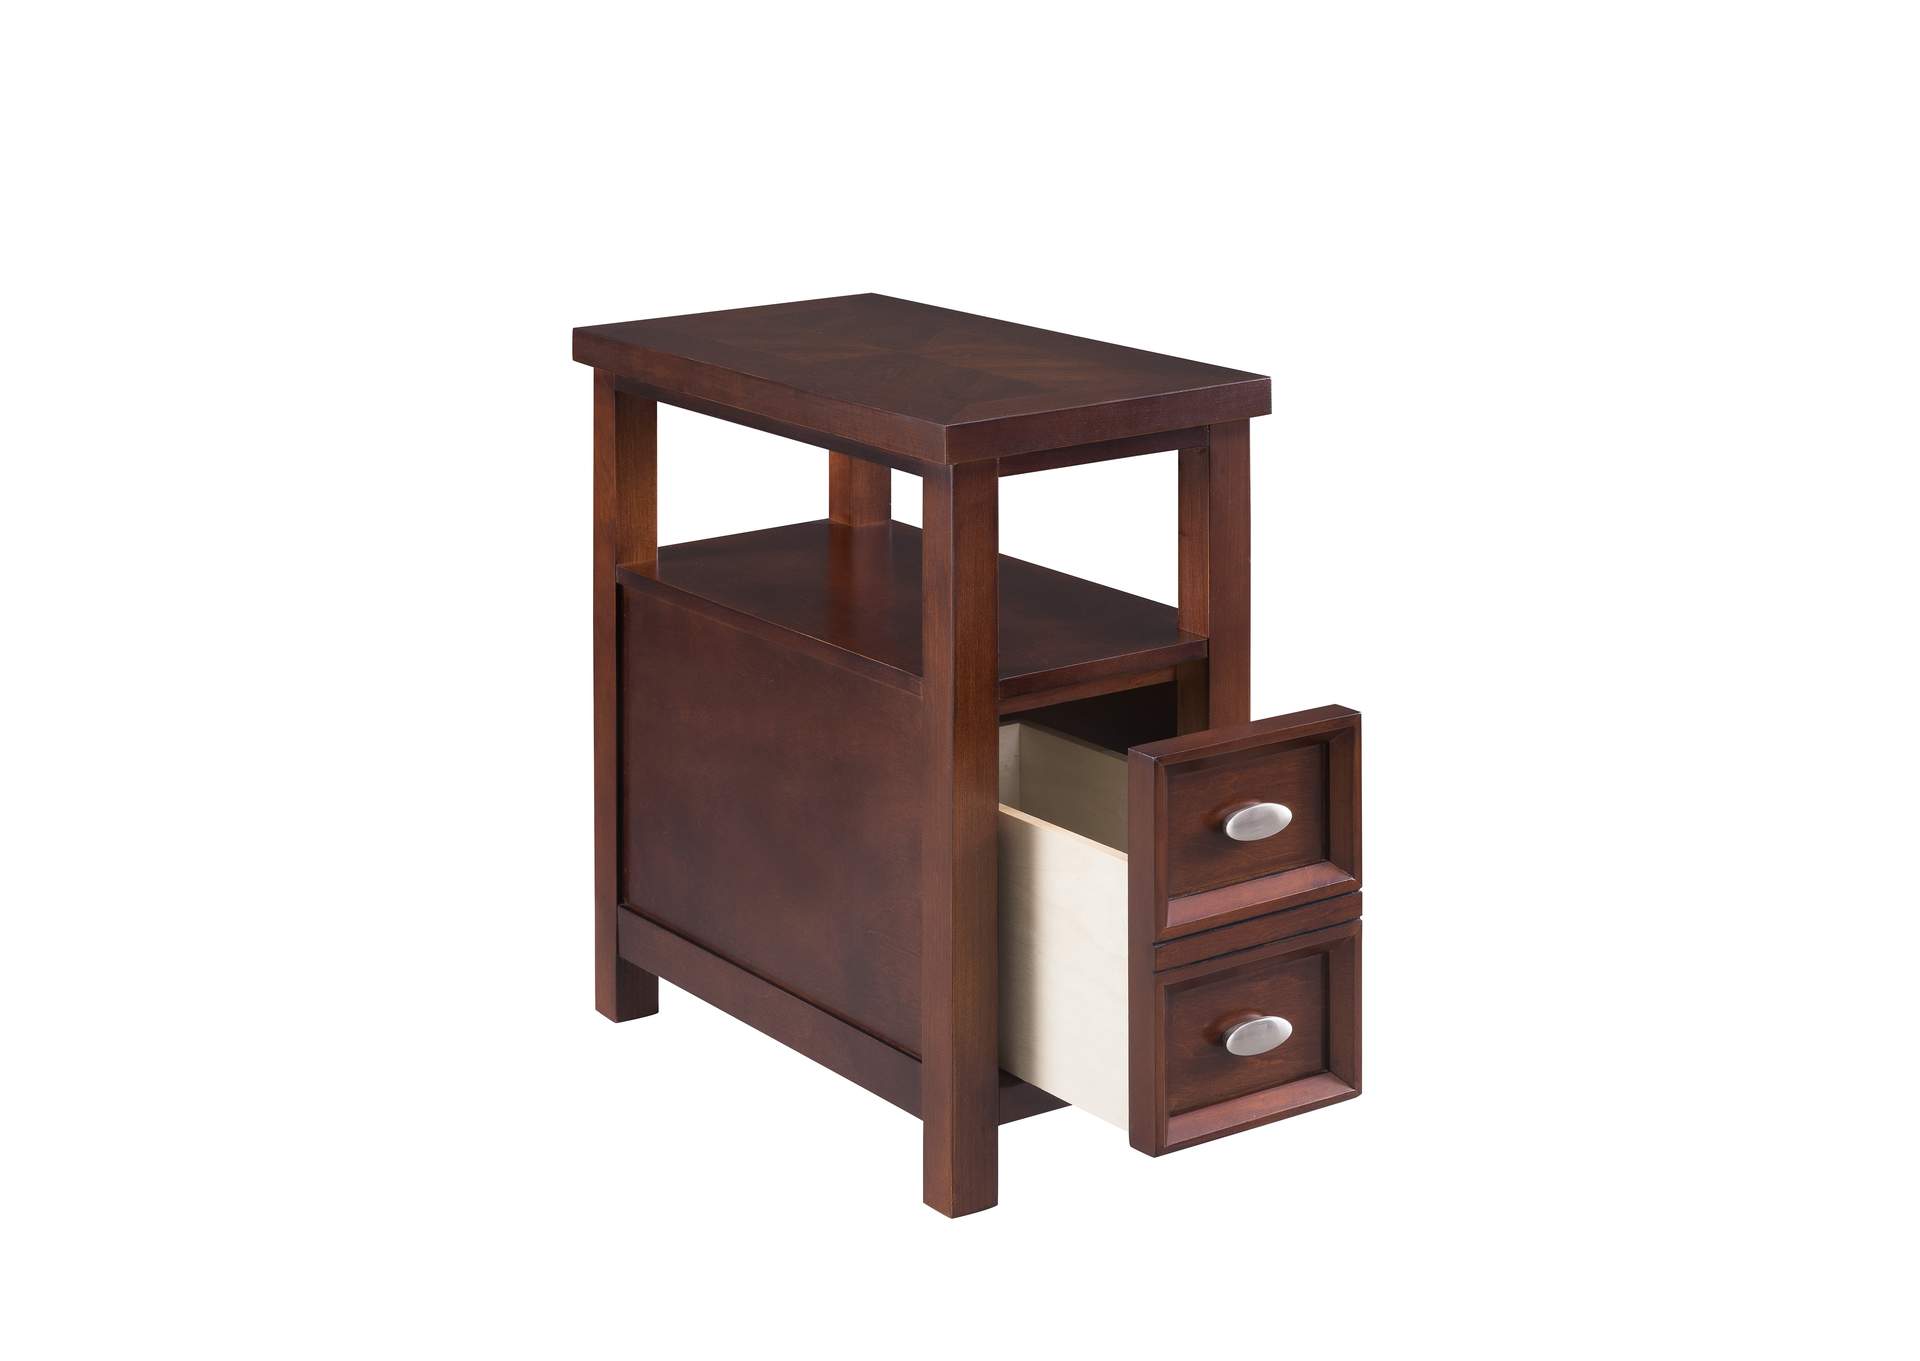 Dempsey Brown Dempsey Chairside Table,Crown Mark